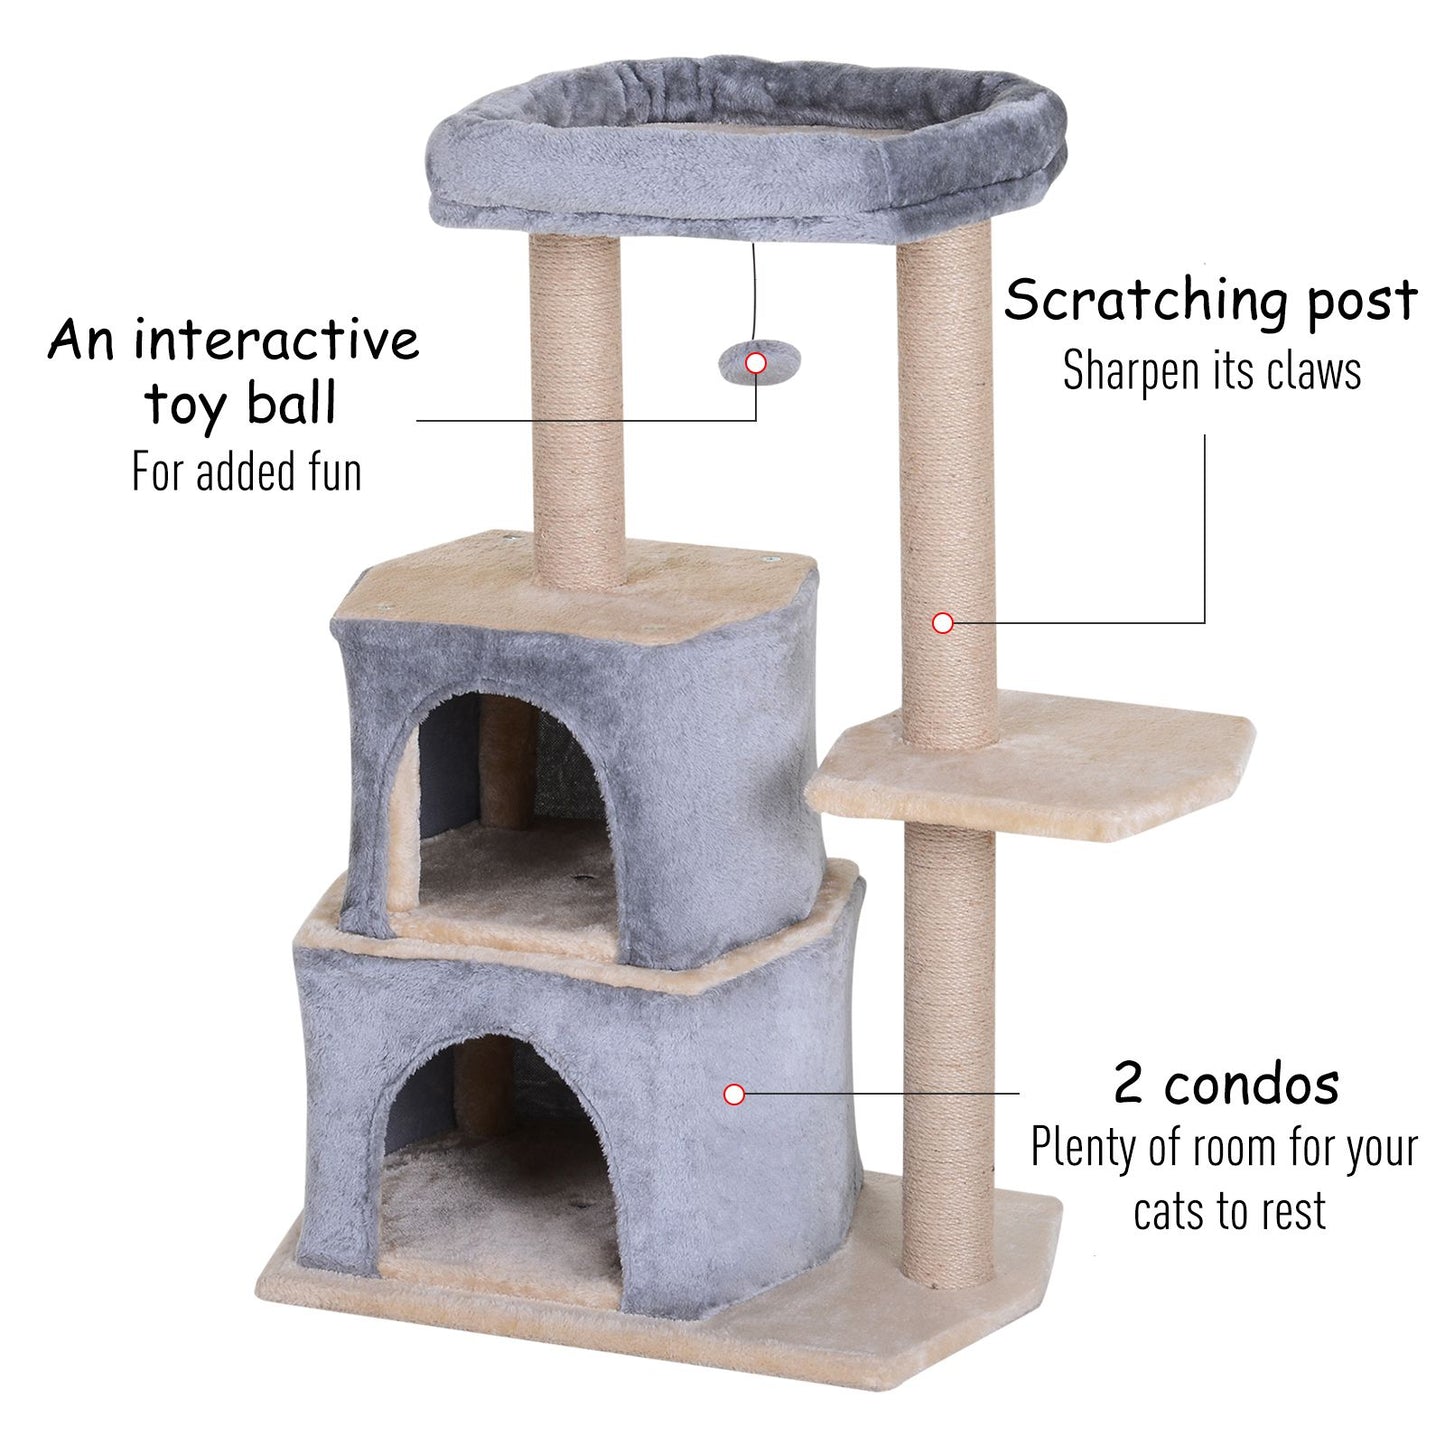 PawHut Multi-Level Cat Scratching Tree Condo Pet Activity Centre with Sisal-Covered Scratching Posts Perch w/ Bed and Dangle Toy Grey